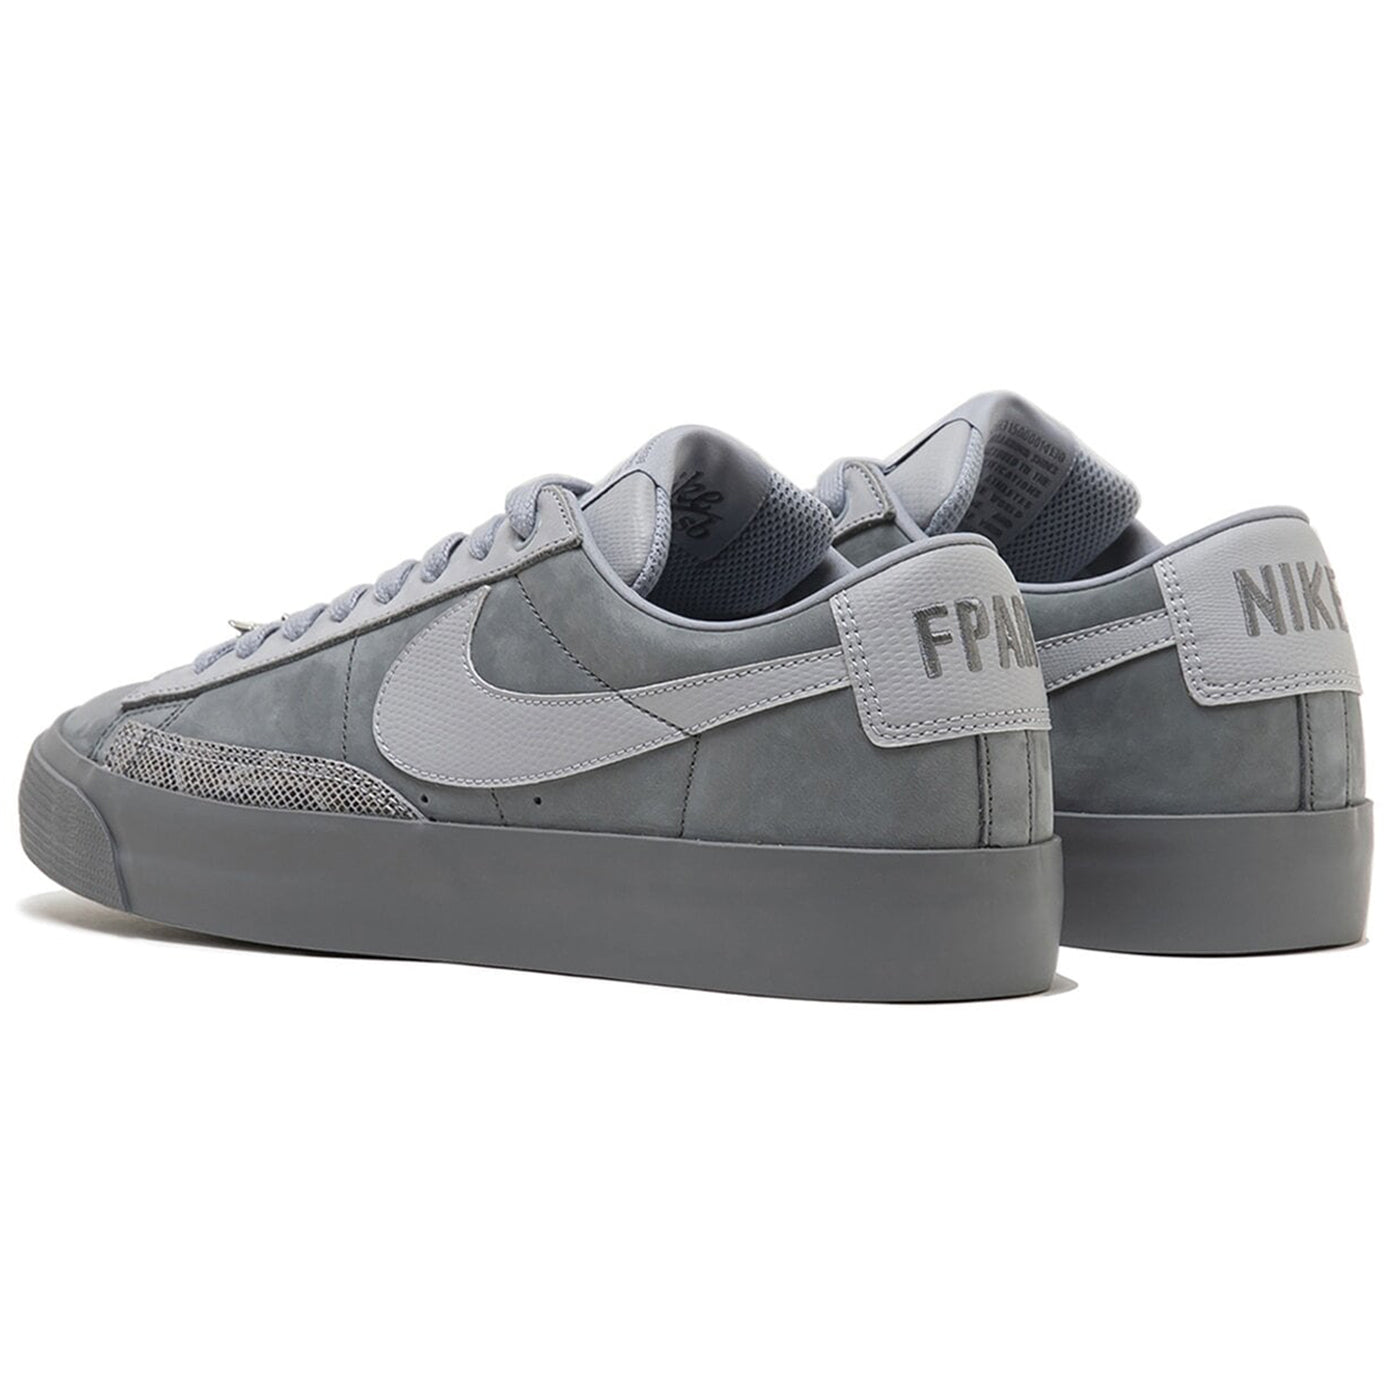 Comprometido costo Capitán Brie FPAR Zoom Blazer Low Shoes in Cool Grey / Wolf Grey by Nike SB | Bored of  Southsea